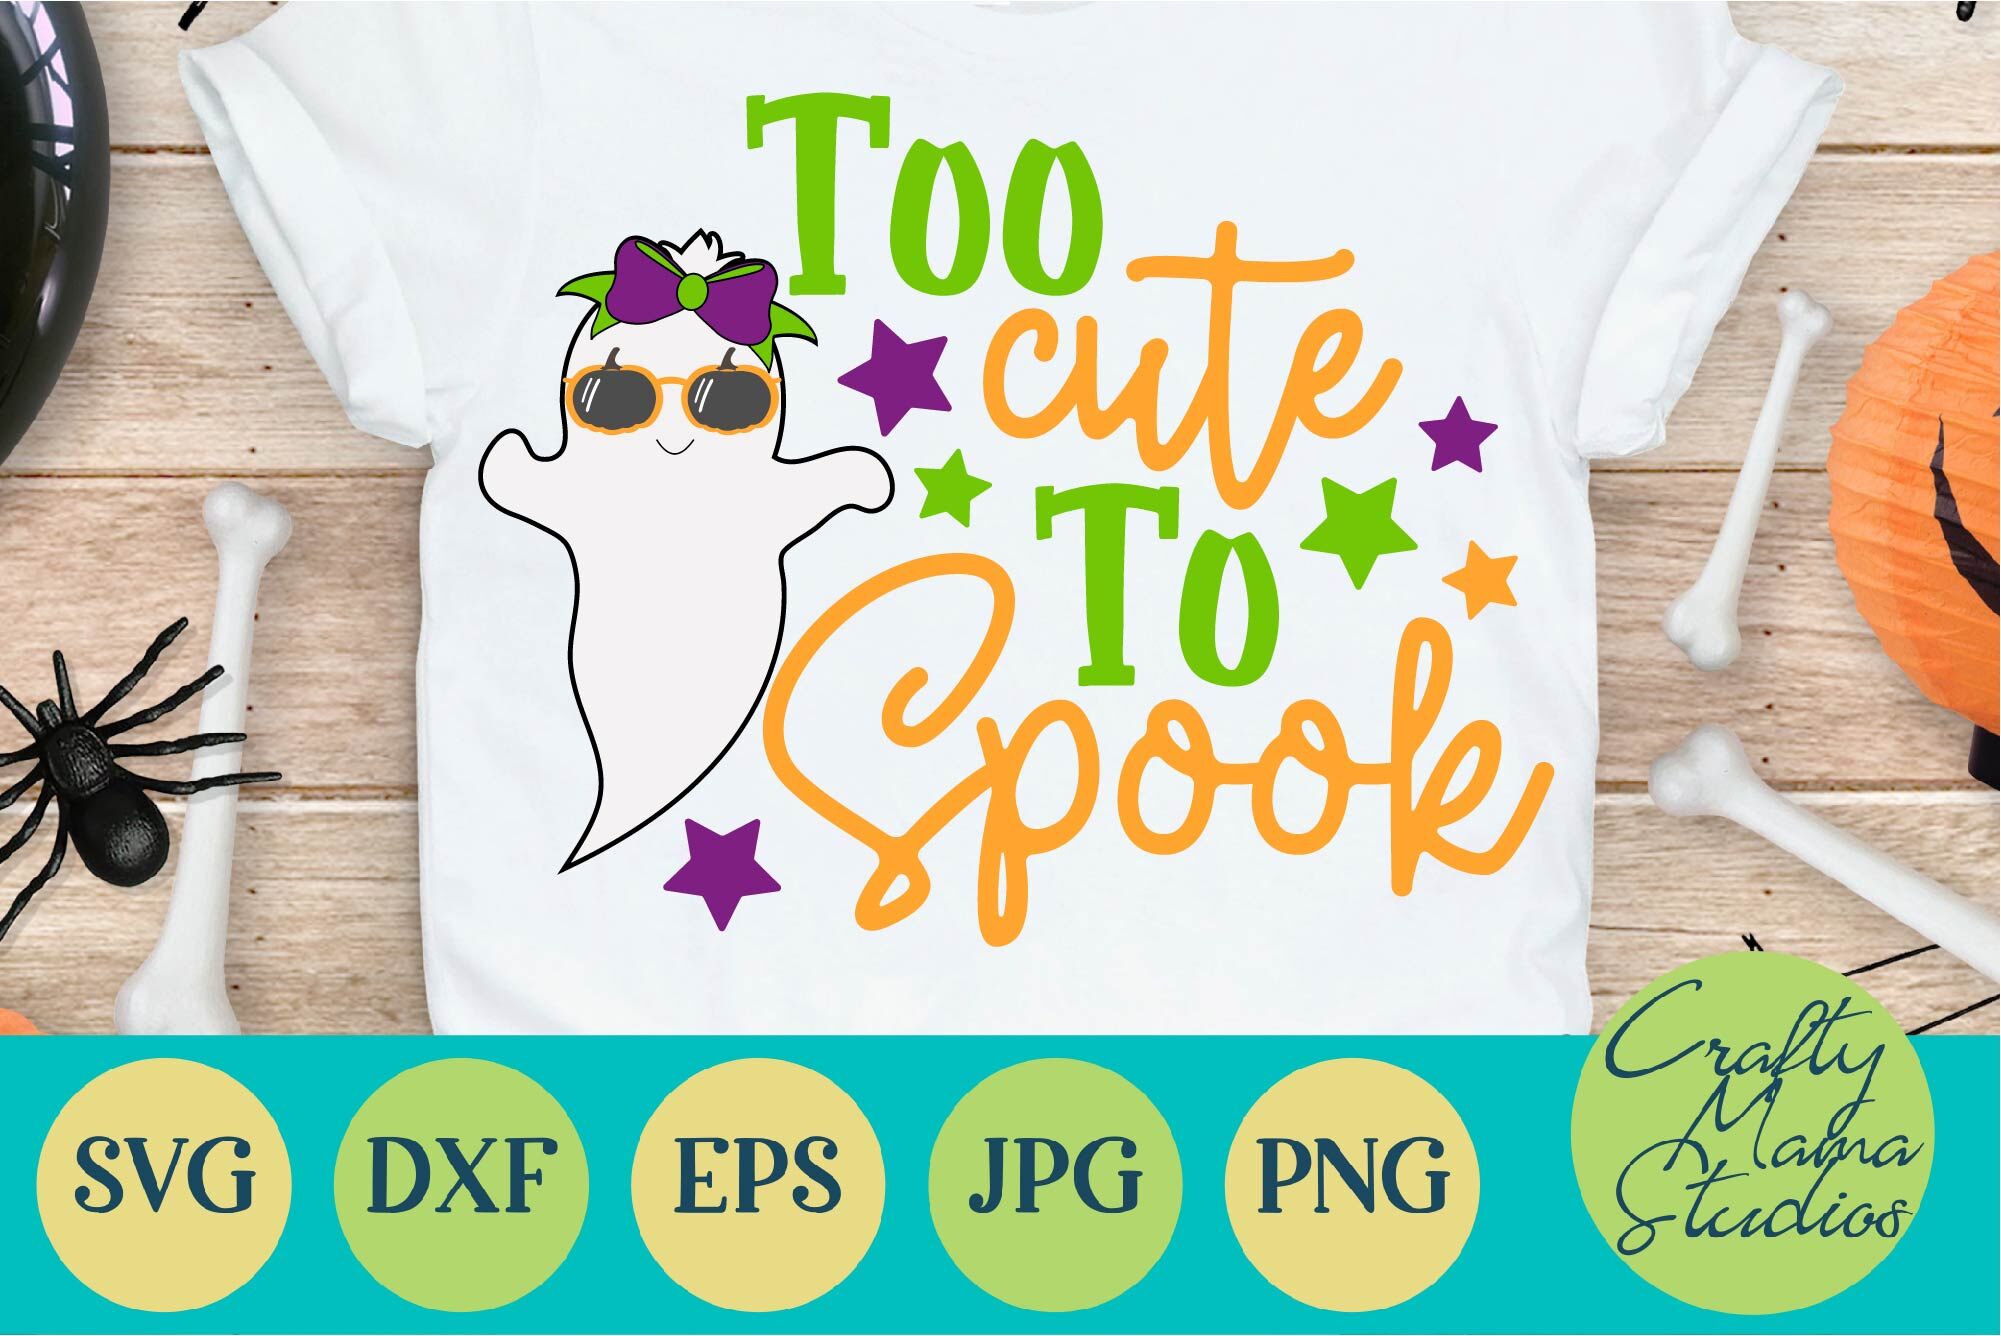 Ghost Svg Too Cute To Spook Svg Halloween Girl Ghost Svg By Crafty Mama Studios Thehungryjpeg Com